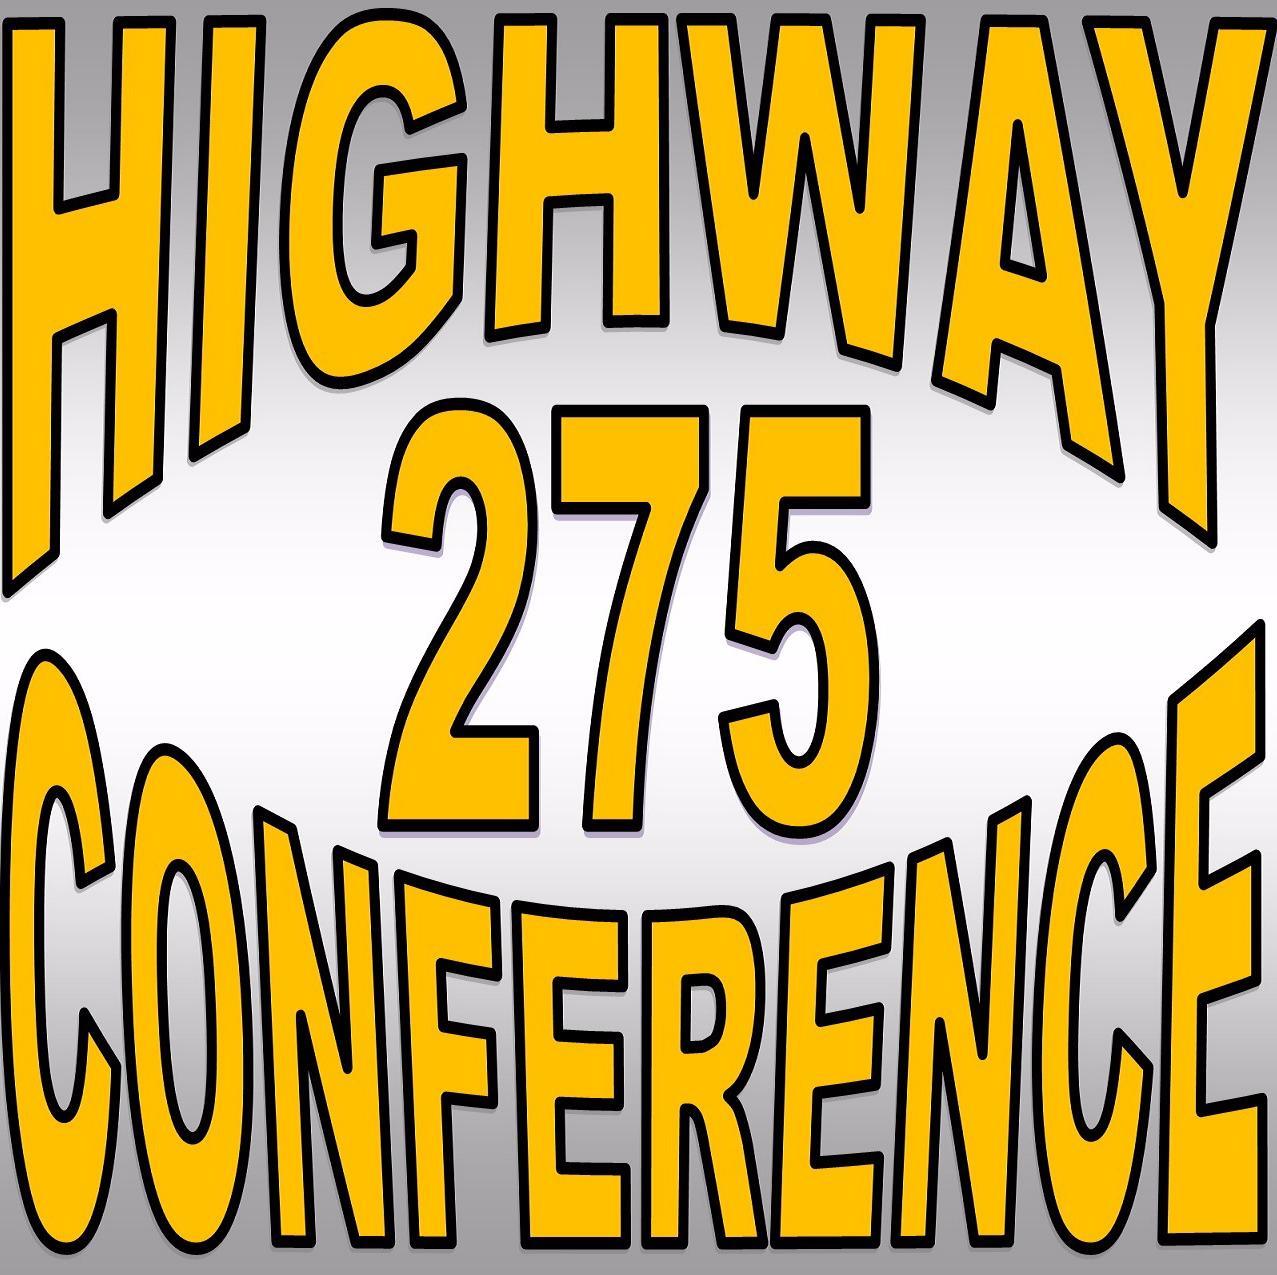 275 Conference